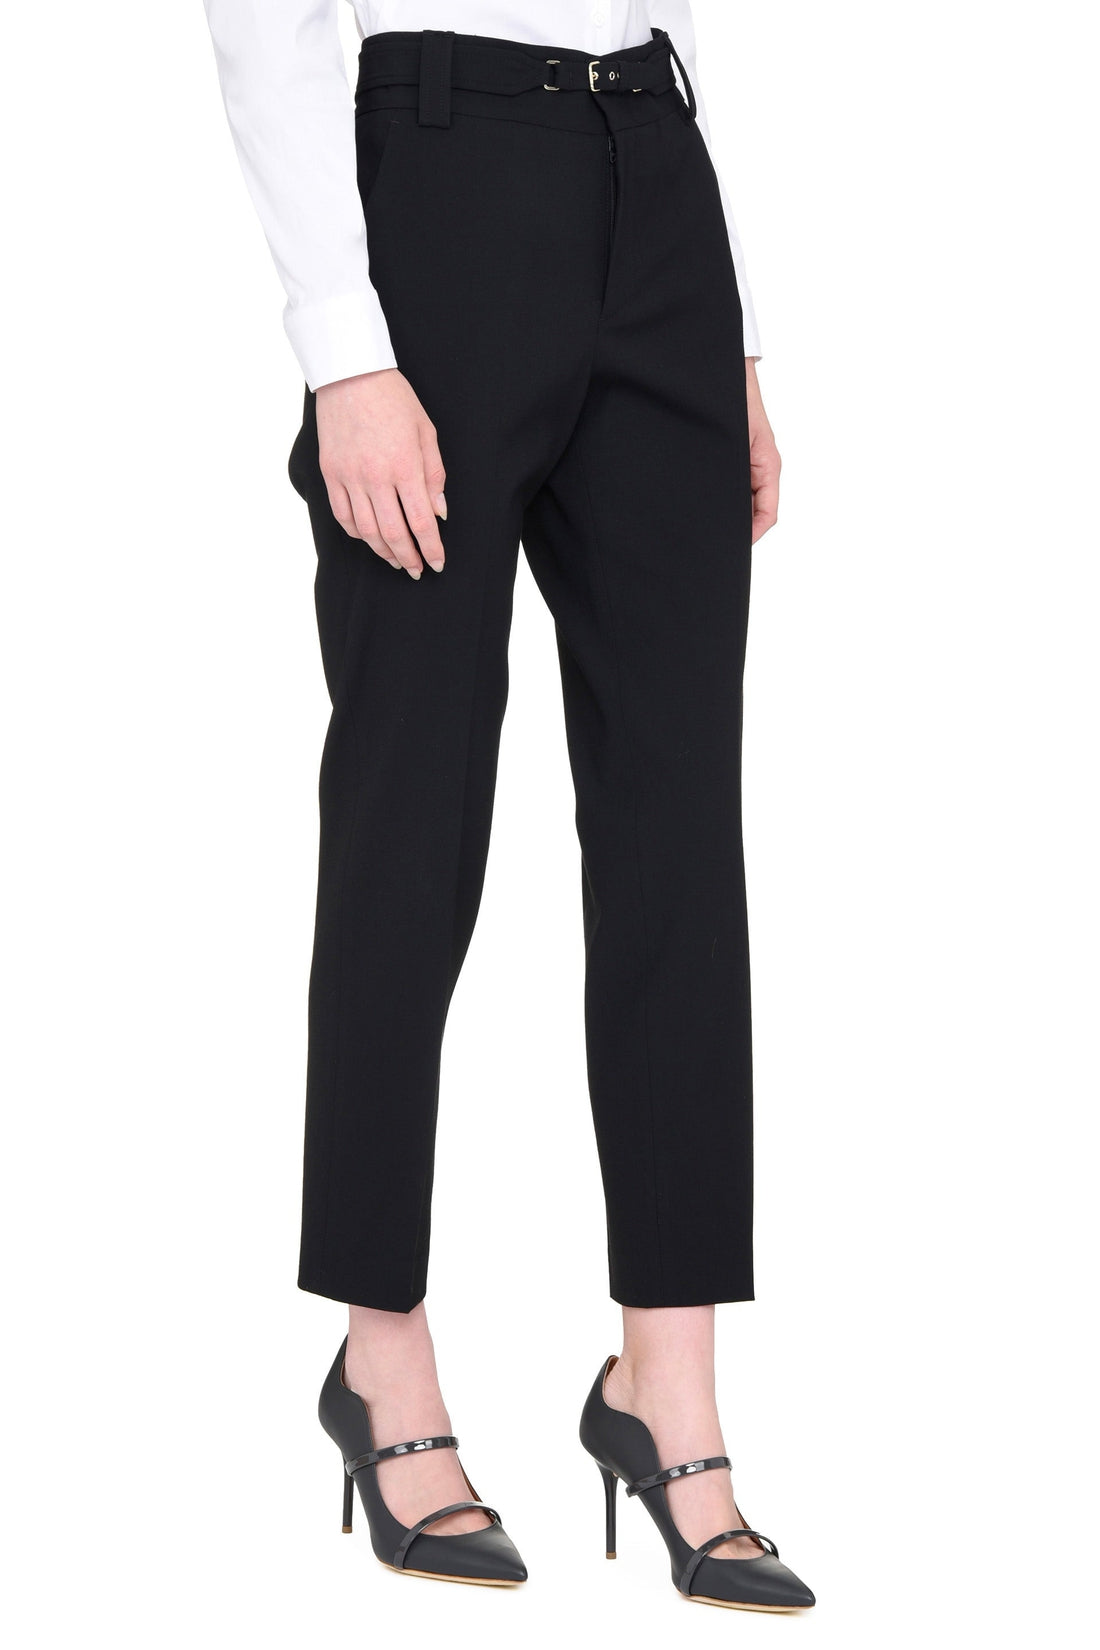 RED VALENTINO-OUTLET-SALE-Virgin wool tailored trousers-ARCHIVIST